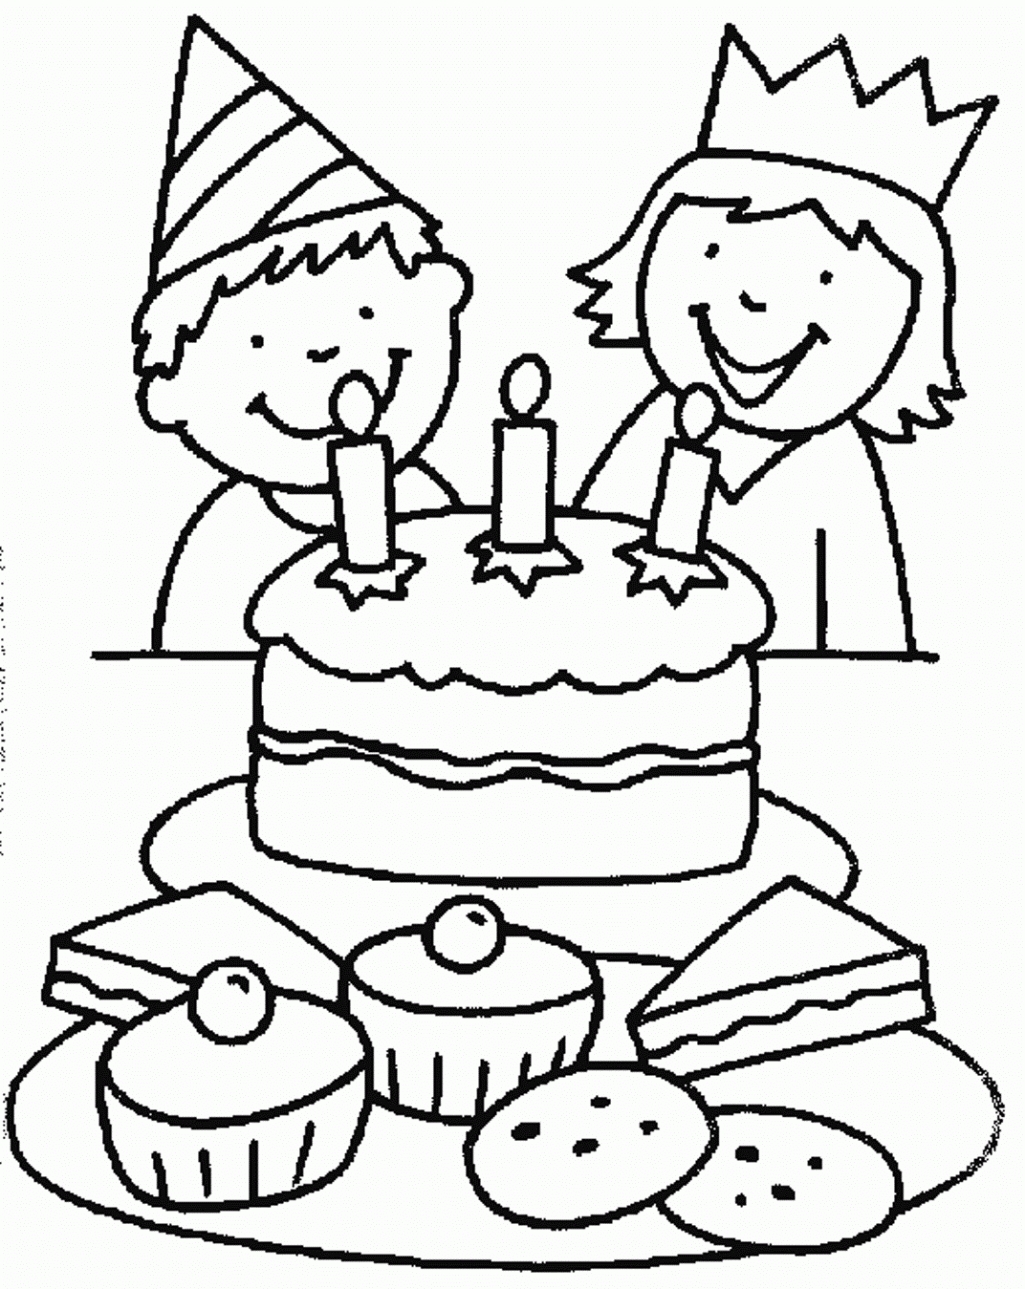 Coloring Pages: Free Coloring Pages Of T Cake Blank Birthday Cake ...